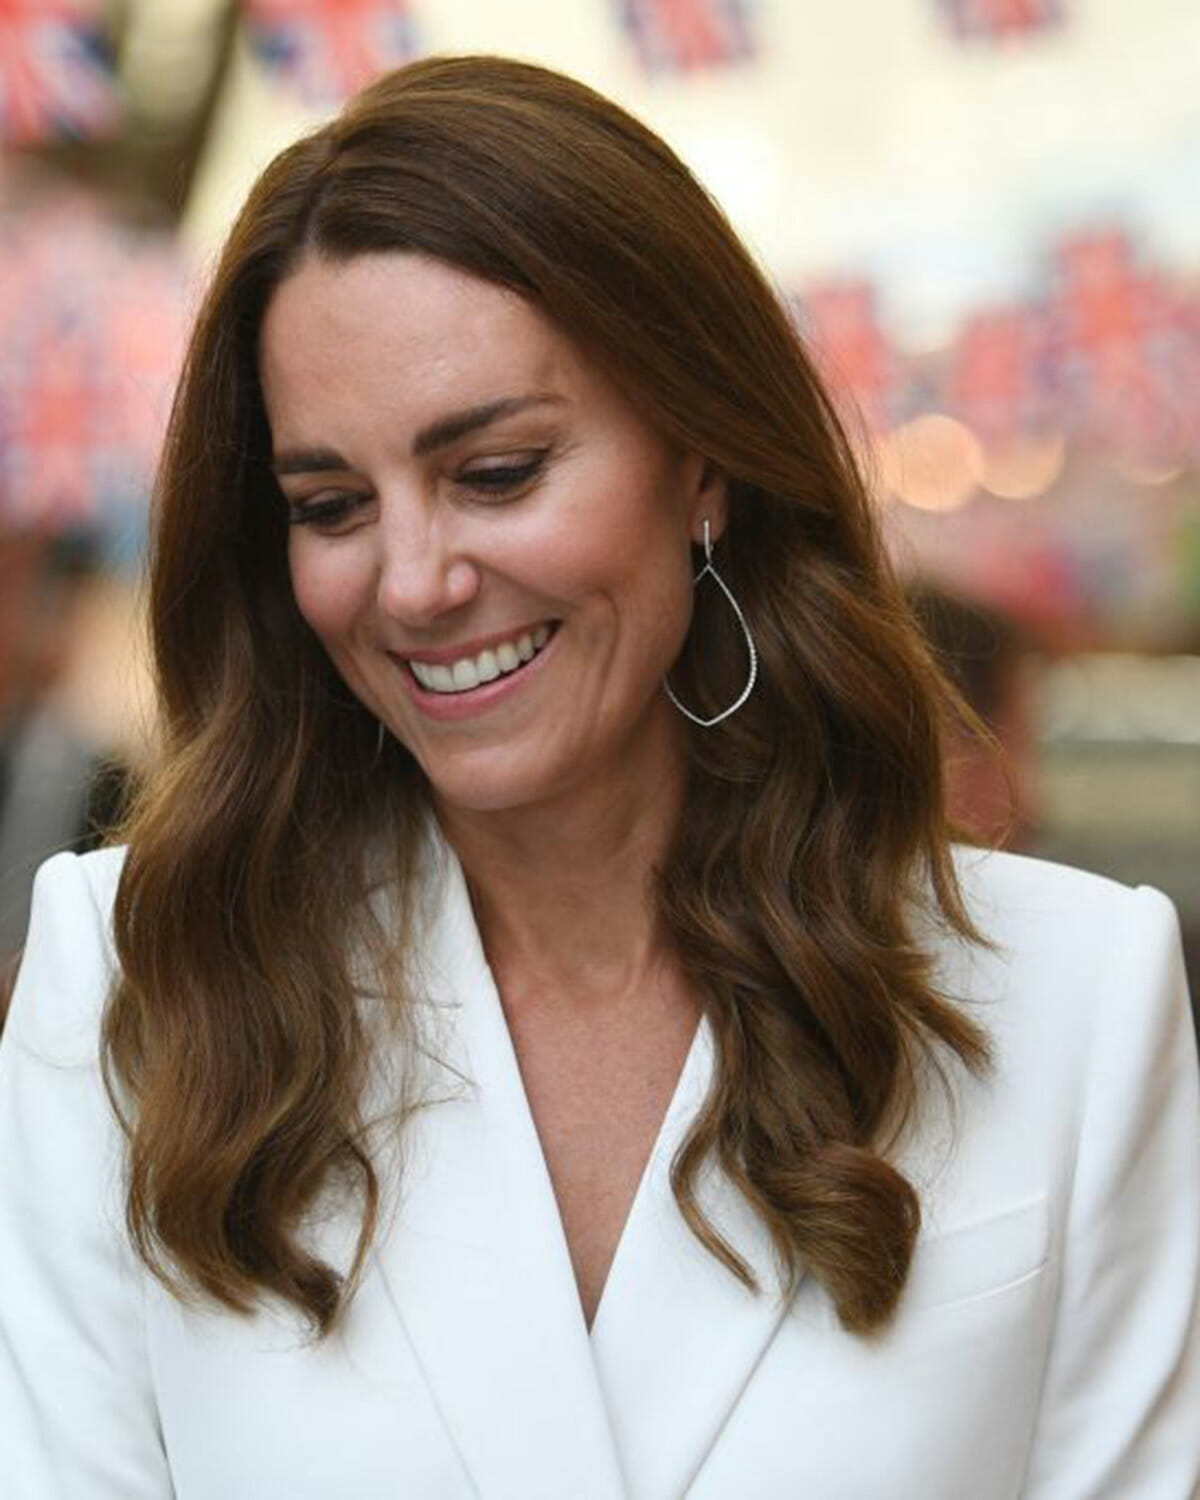 Kate Middleton's Best Diamond Jewelry Looks | Only Natural Diamonds